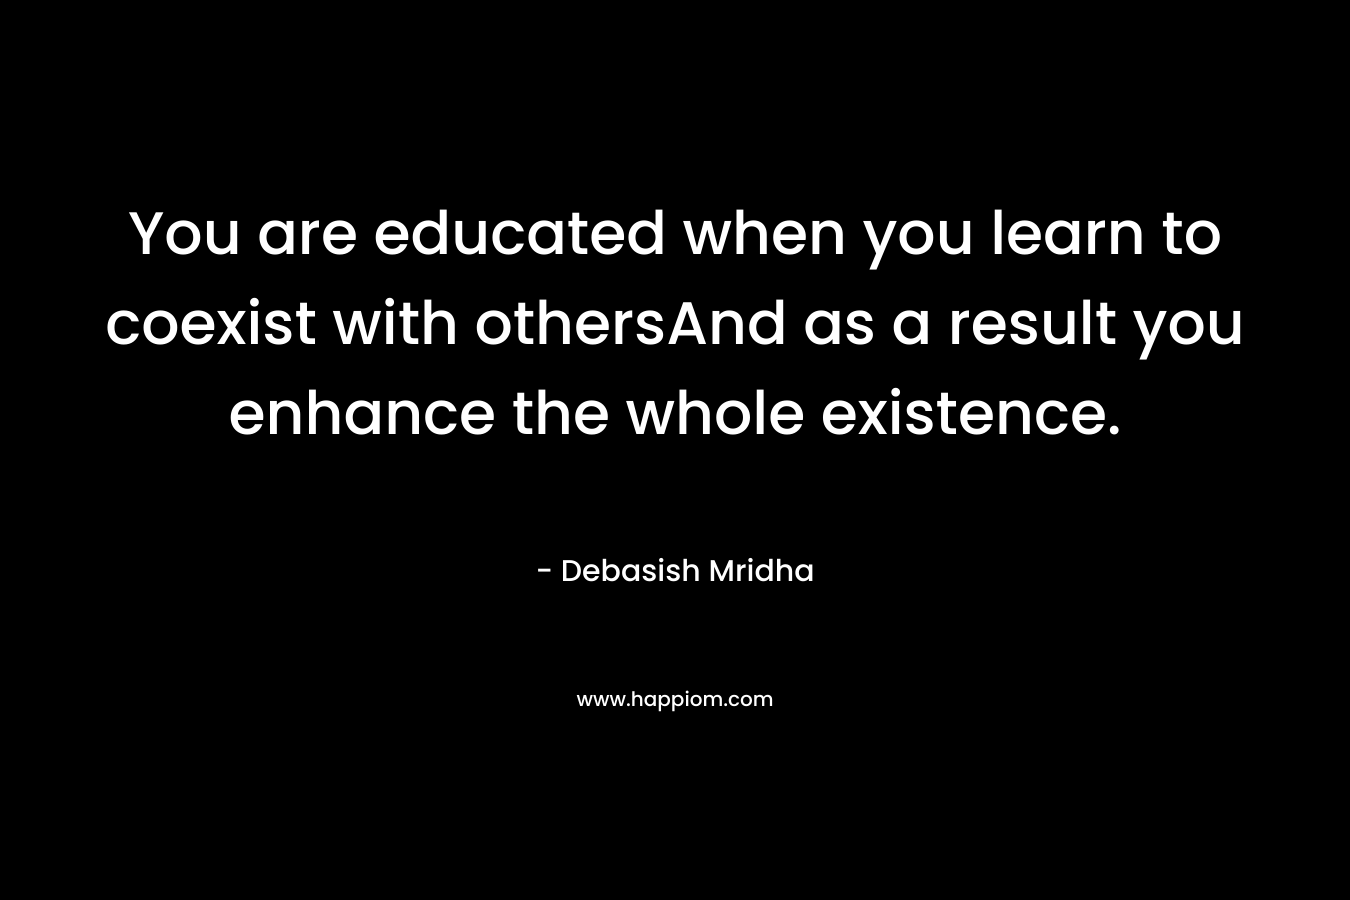 You are educated when you learn to coexist with othersAnd as a result you enhance the whole existence. – Debasish Mridha